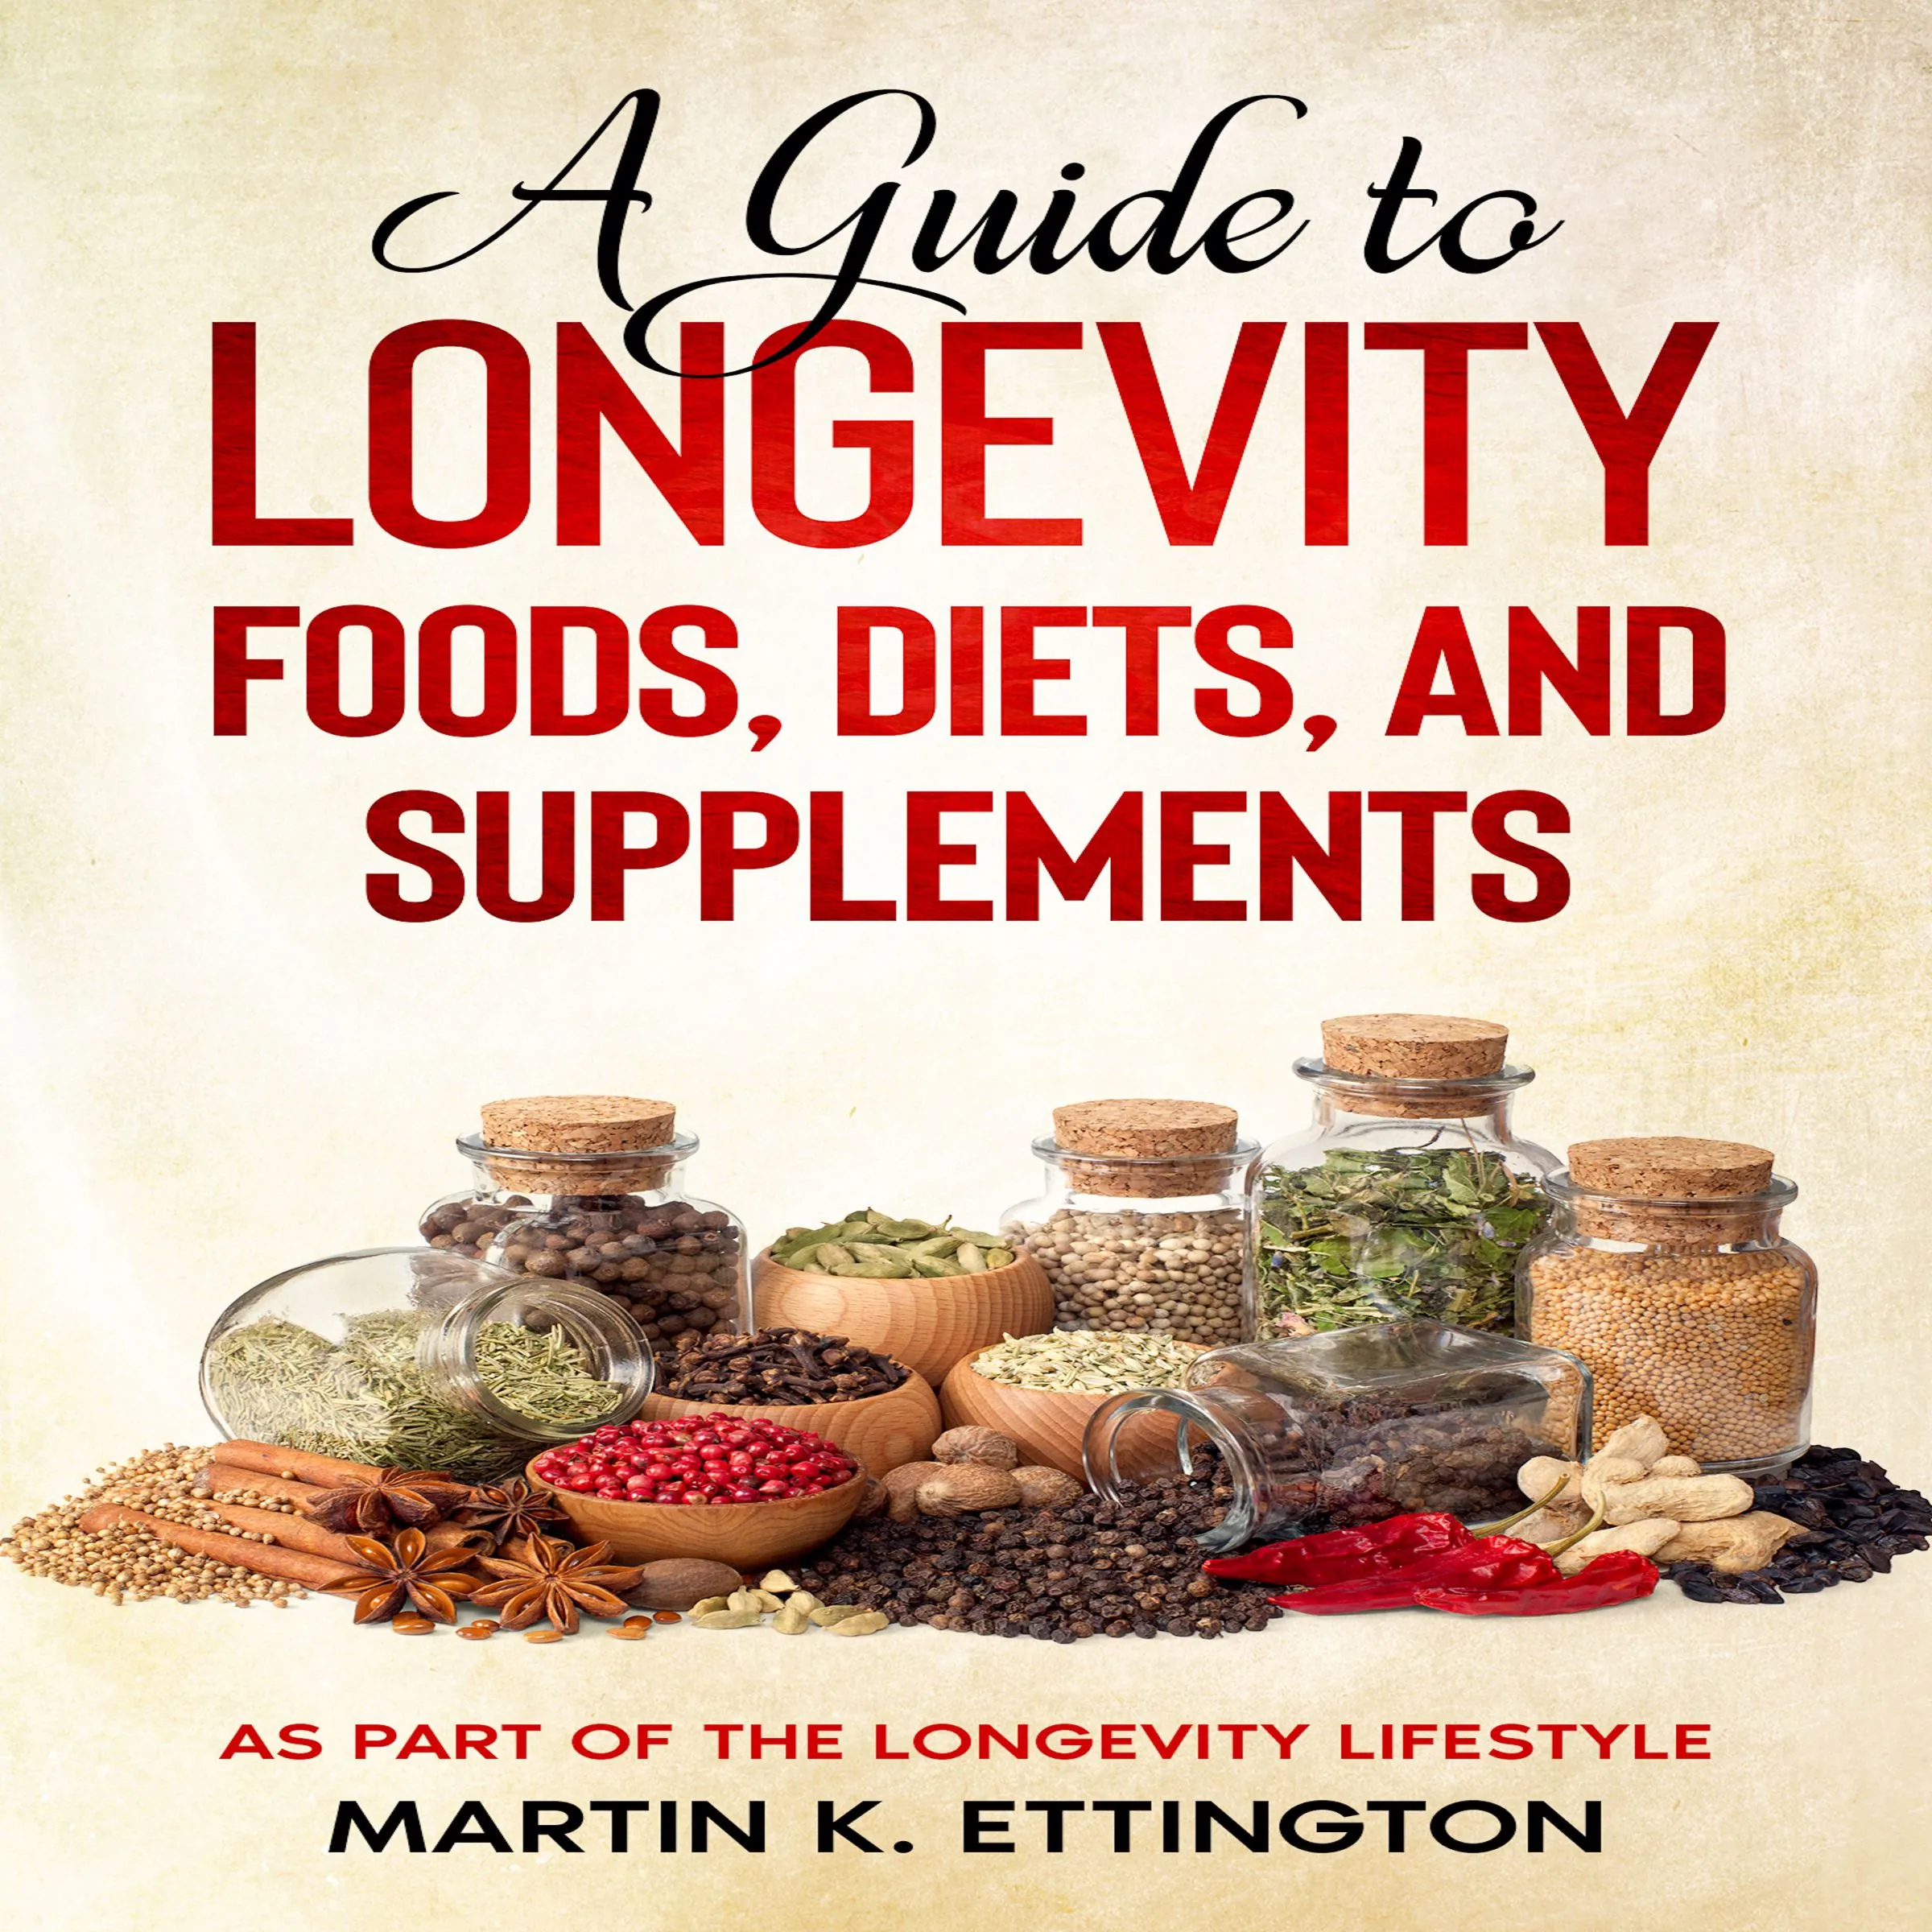 A Guide to Longevity Foods, Diets, and Supplements Audiobook by Martin K. Ettington